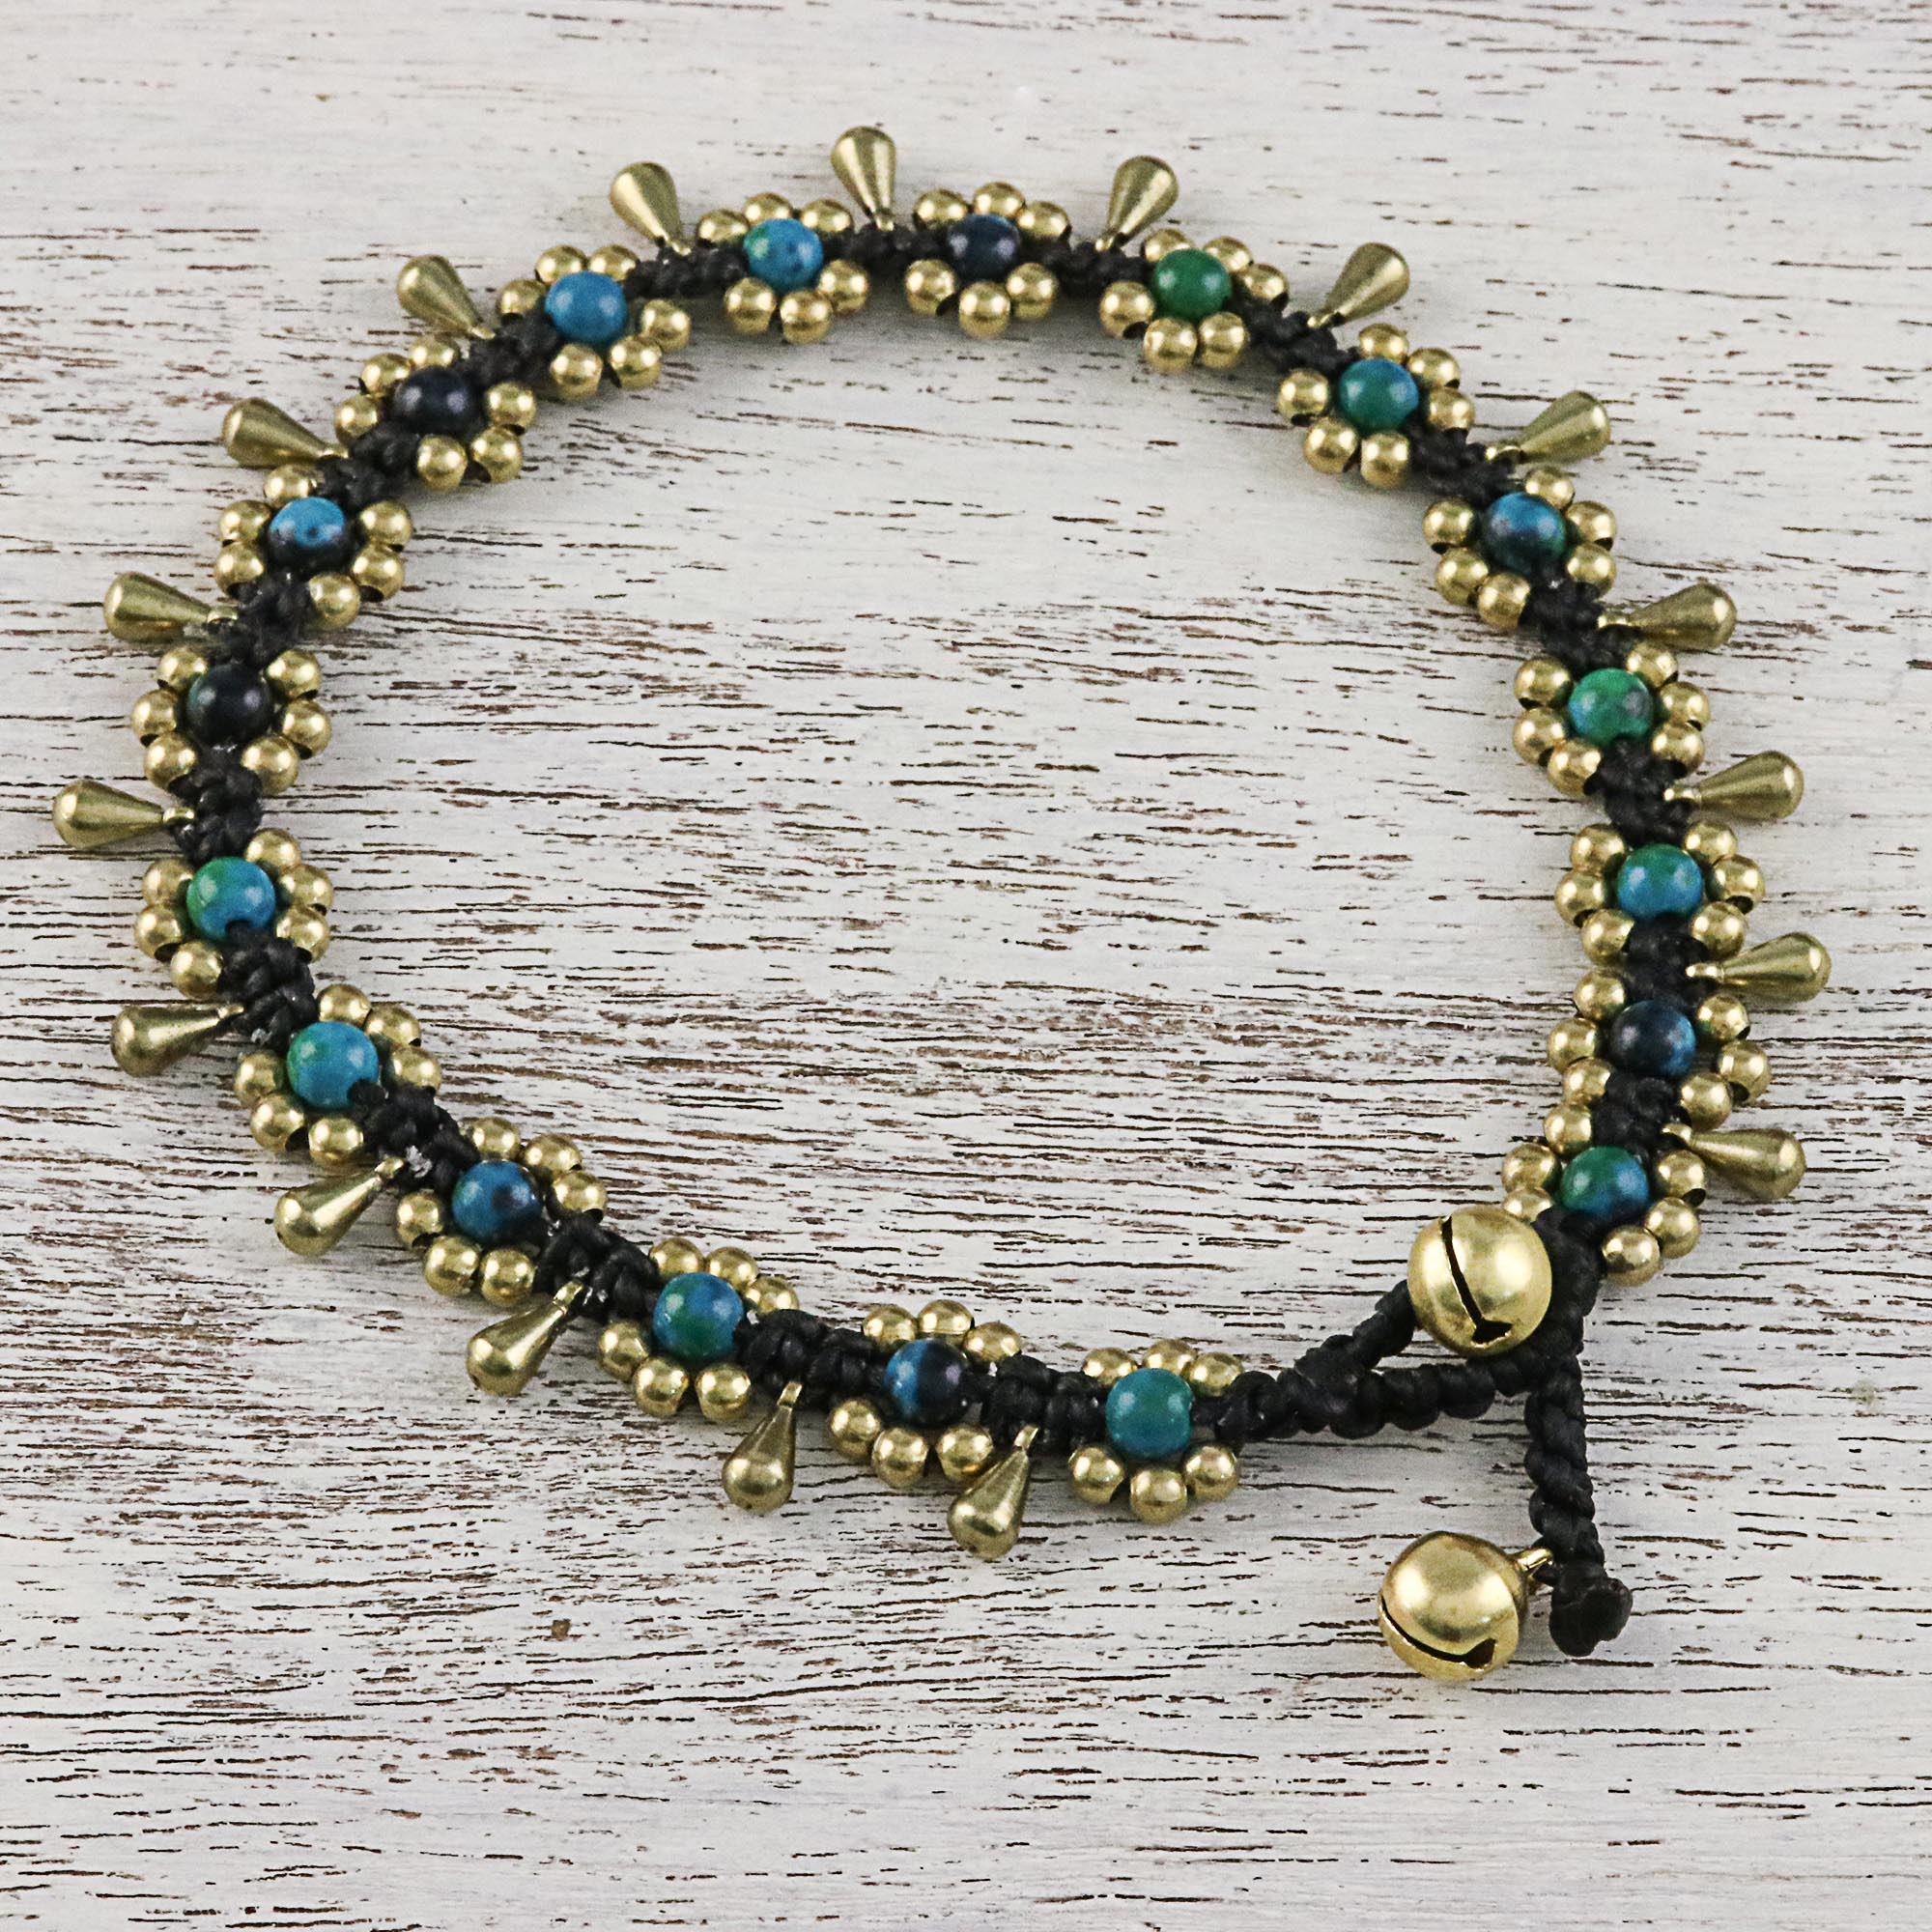 Serpentine Beaded Anklet with Bells from Thailand, 'Elegant Rain'